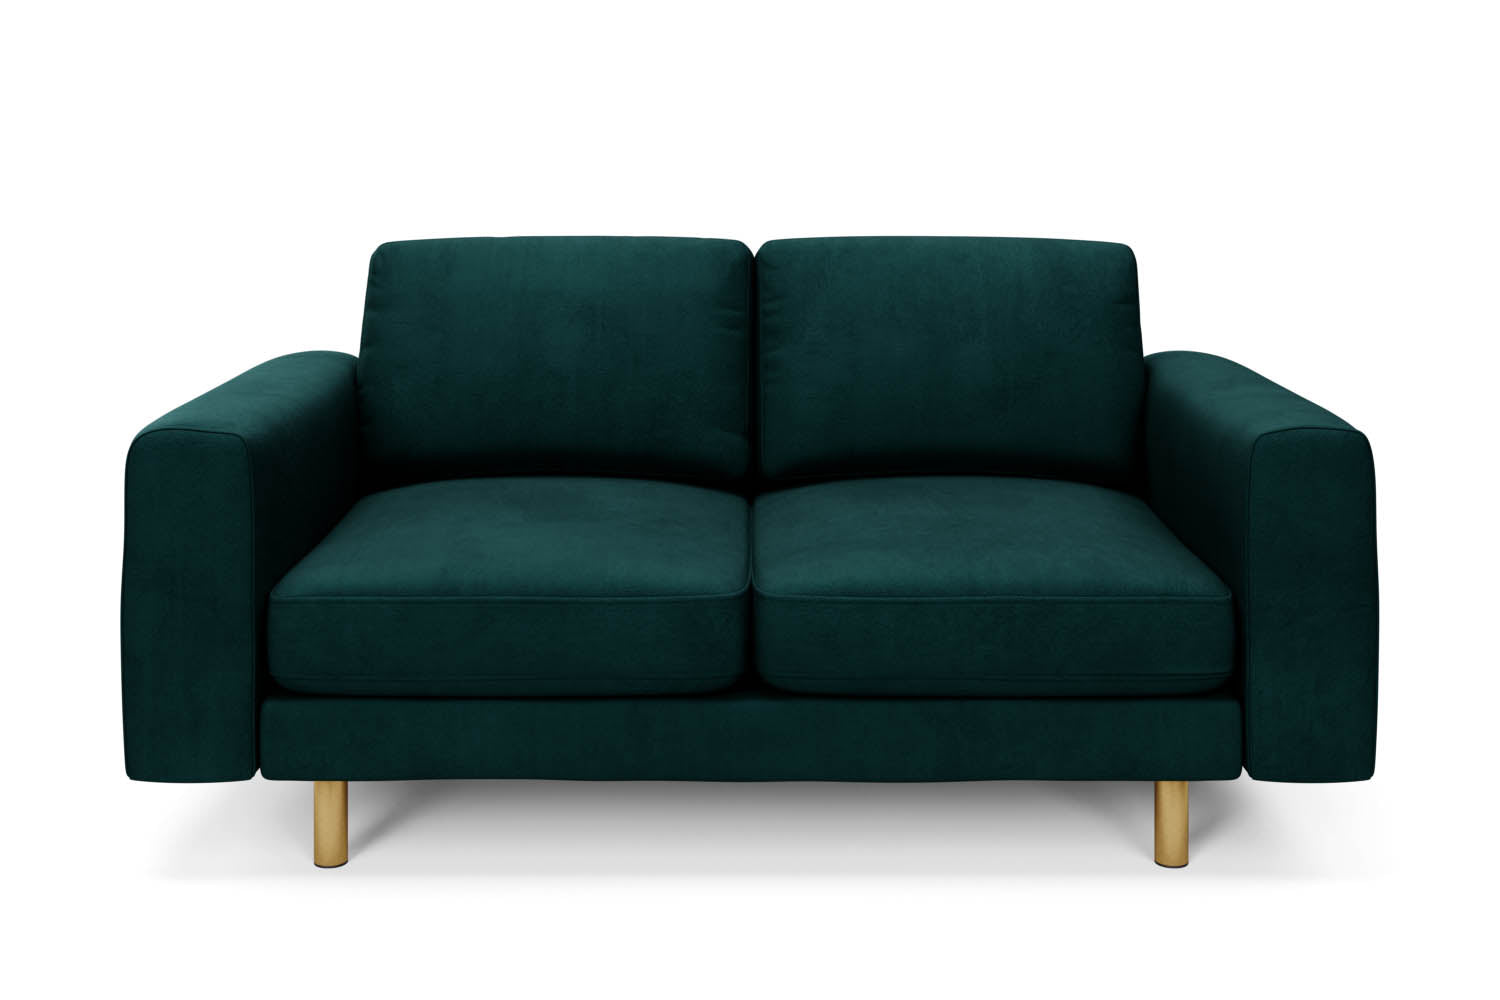 SNUG | The Big Chill 2 Seater Sofa in Pine Green variant_40837198577712